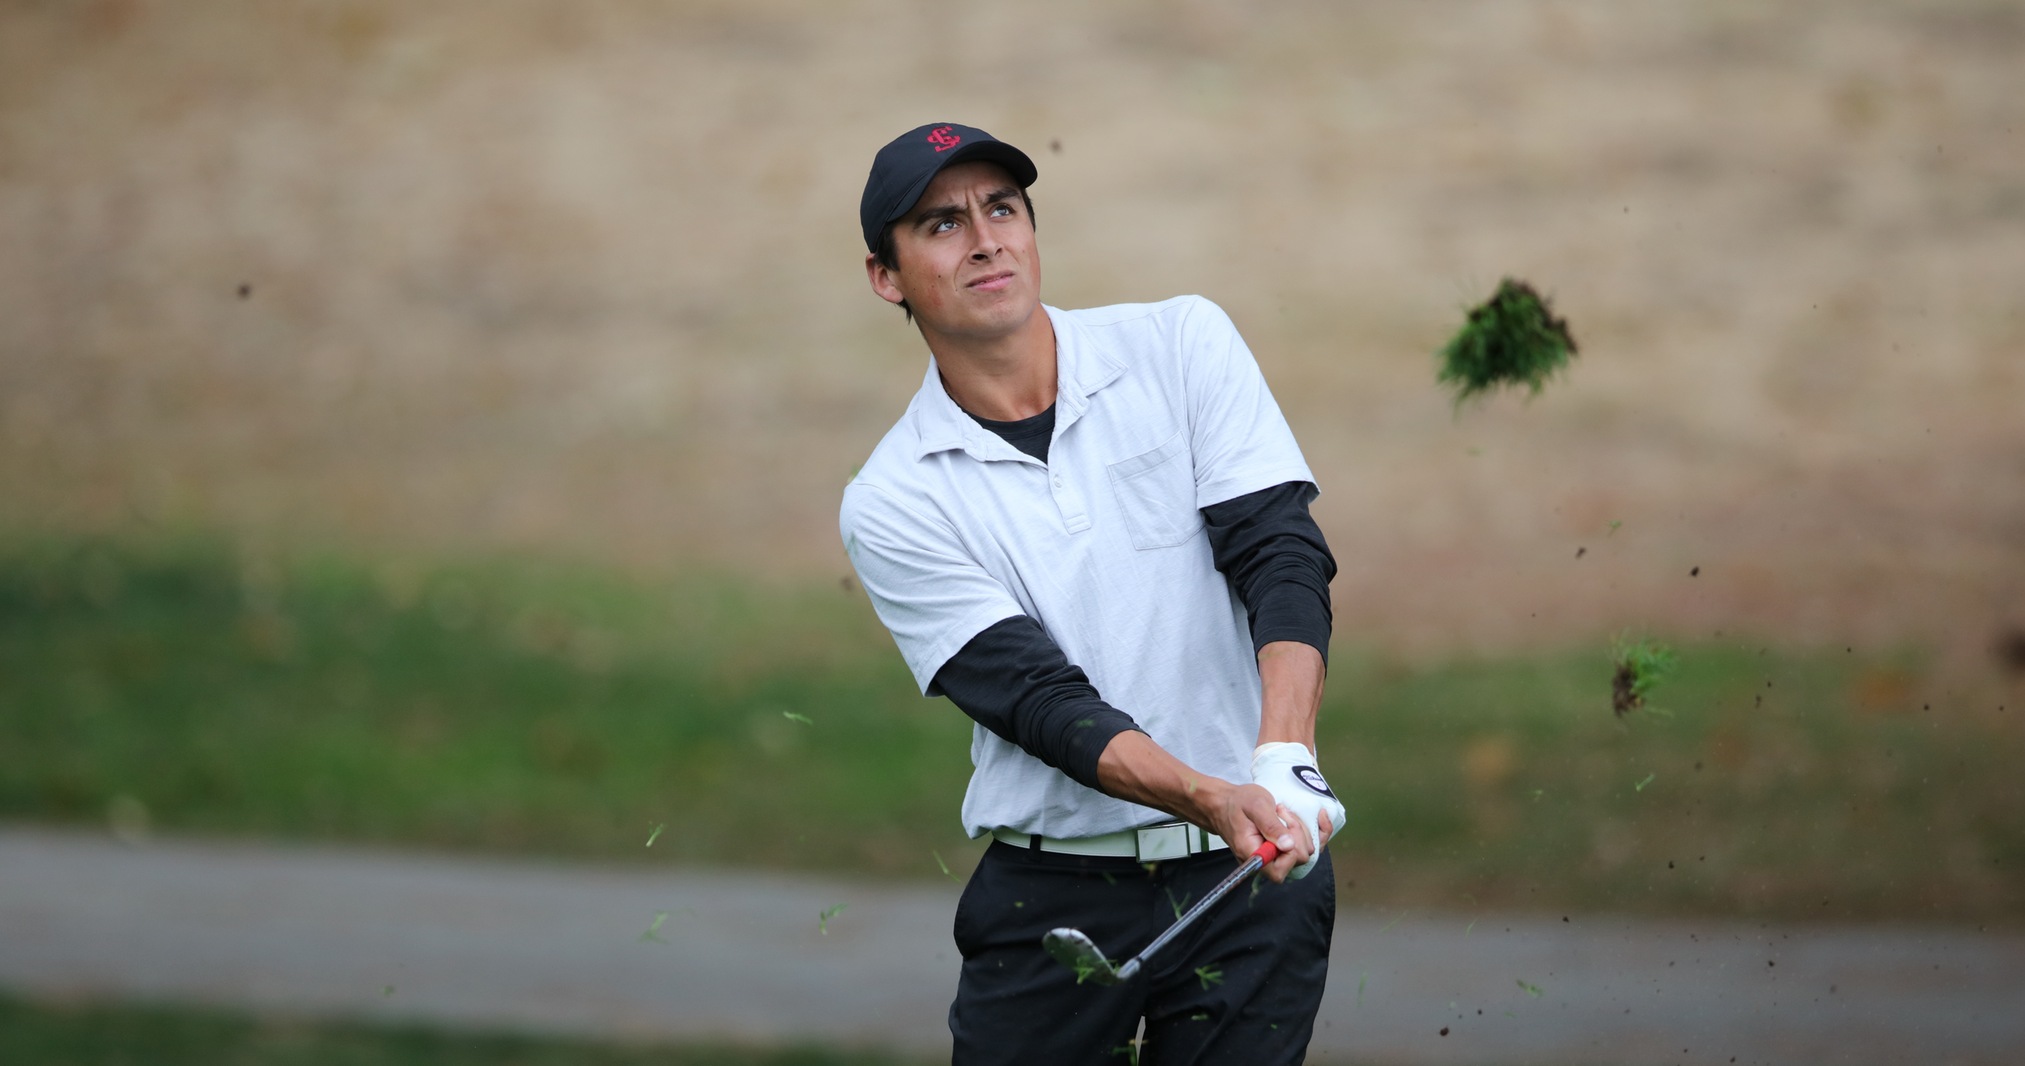 Men’s Golf Opens Play Monday At Geiberger Invitational